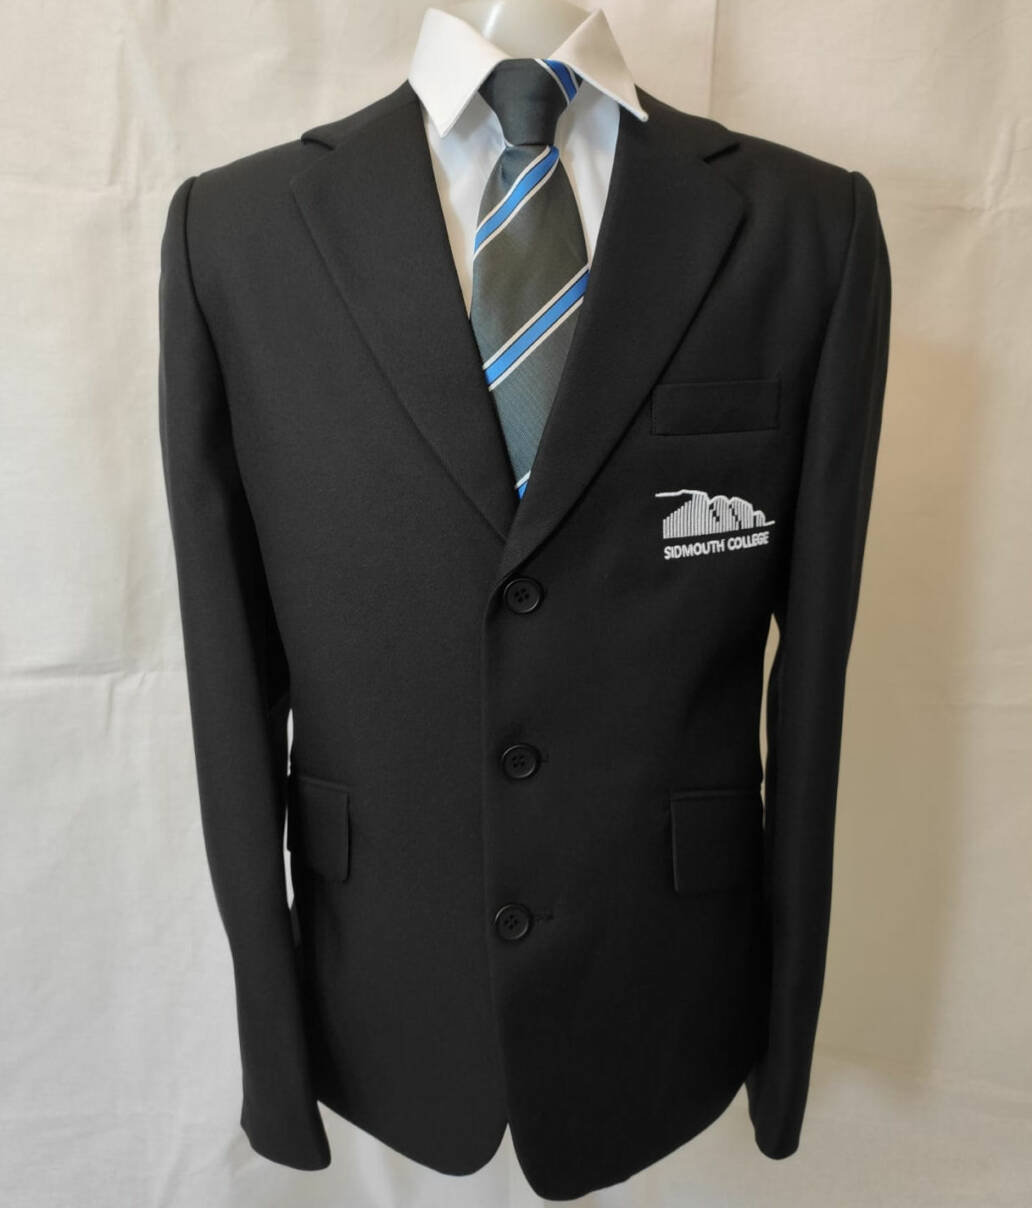 Sidmouth College Boys Jacket